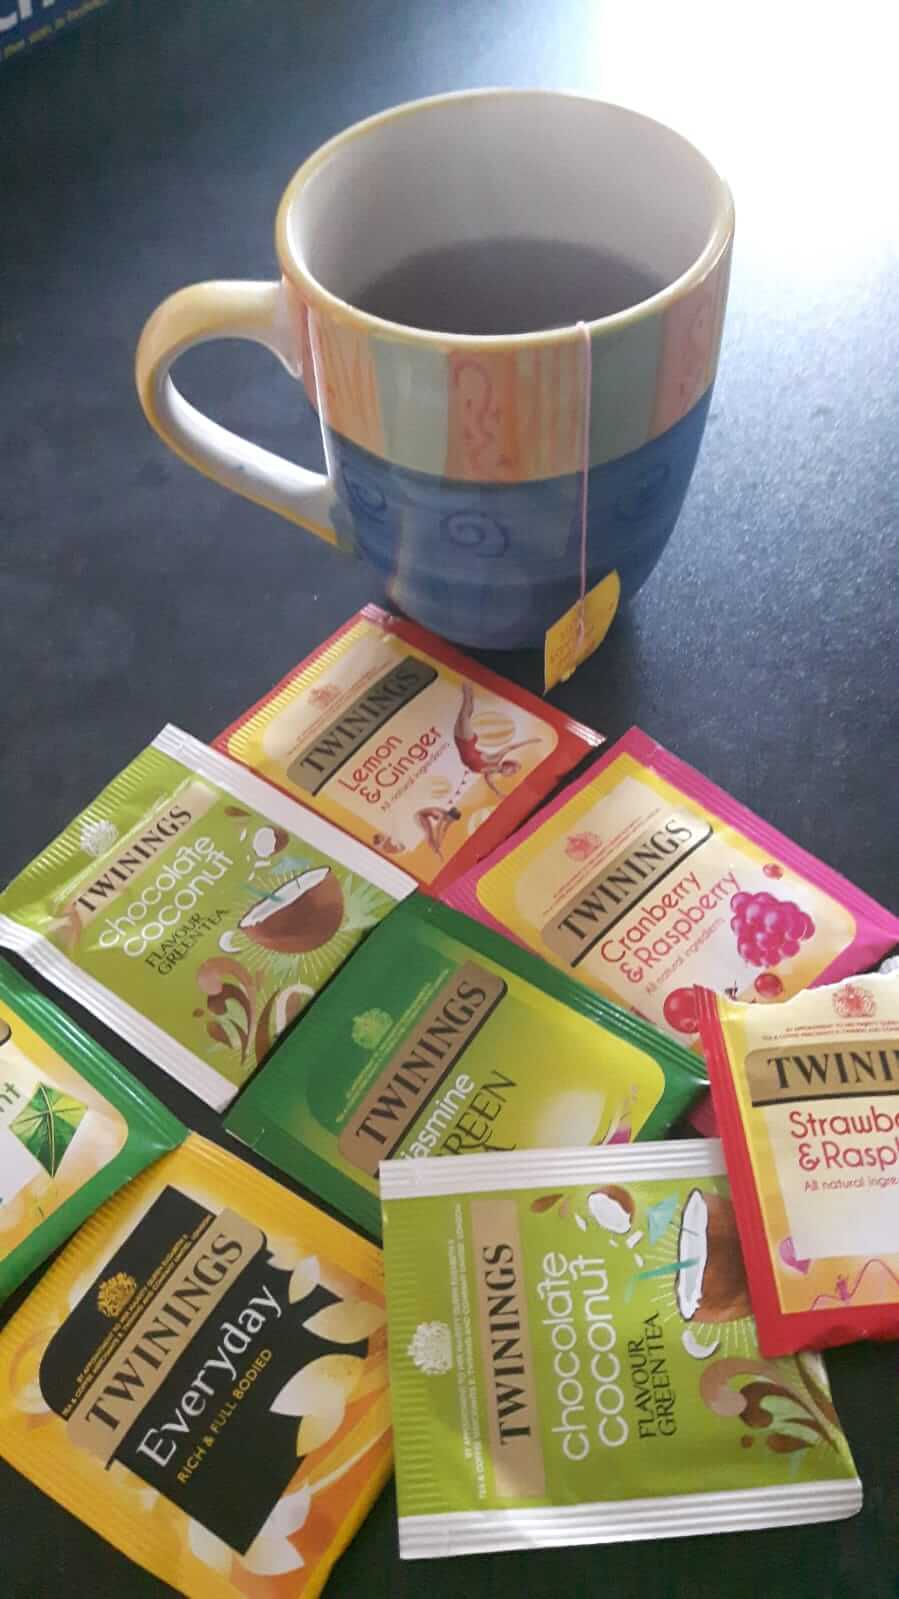 This week I discovered Twinings teas. There are some really unusual blends that are really delicious. Read to see what rating I gave the strawberry and raspberry infusion.